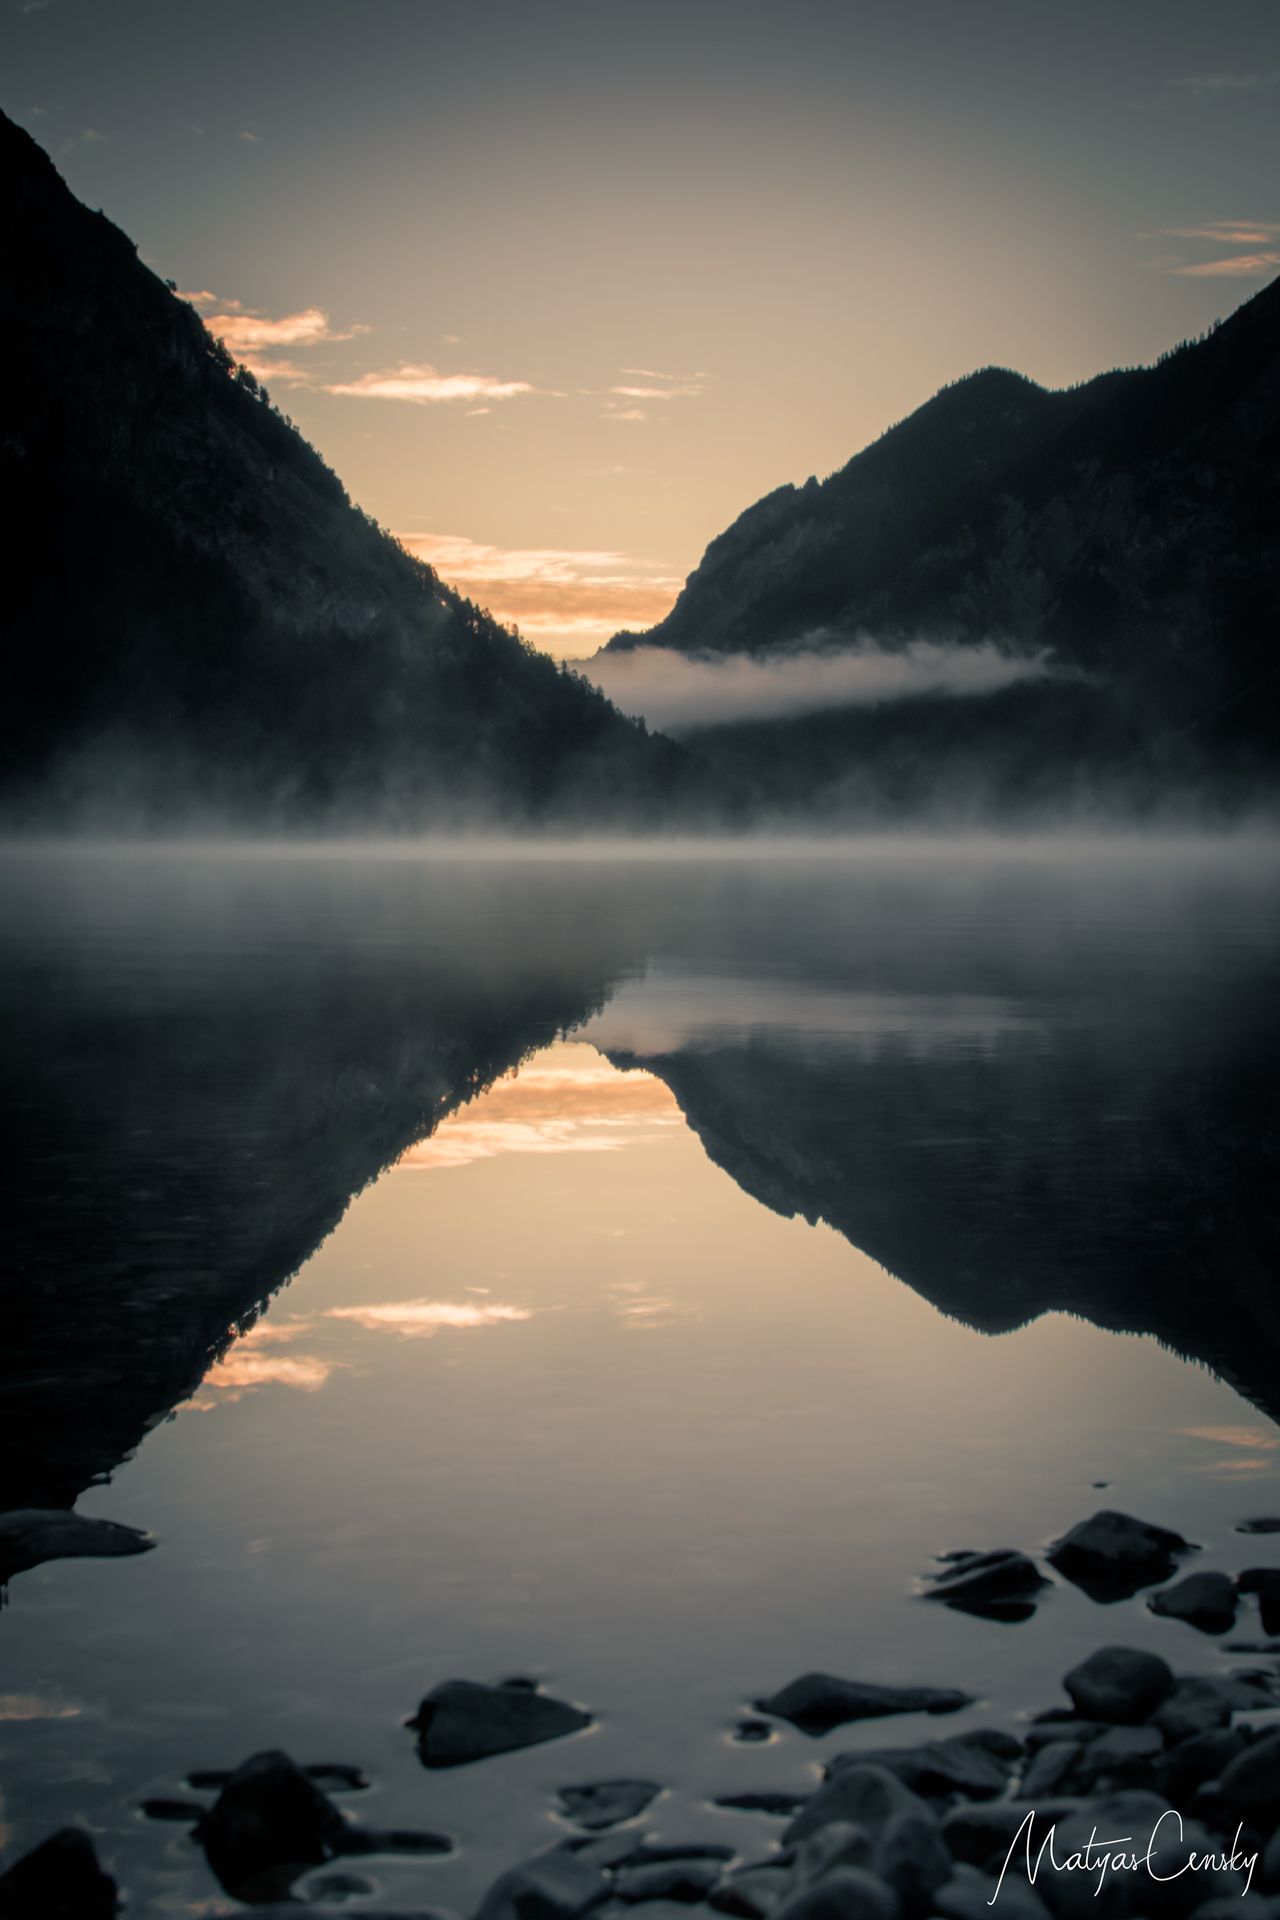 Sunrise over Heiterwanger See, Austria with morning myst over the lake and clear reflection of the sun rise with silluette of the mountains in the still water.